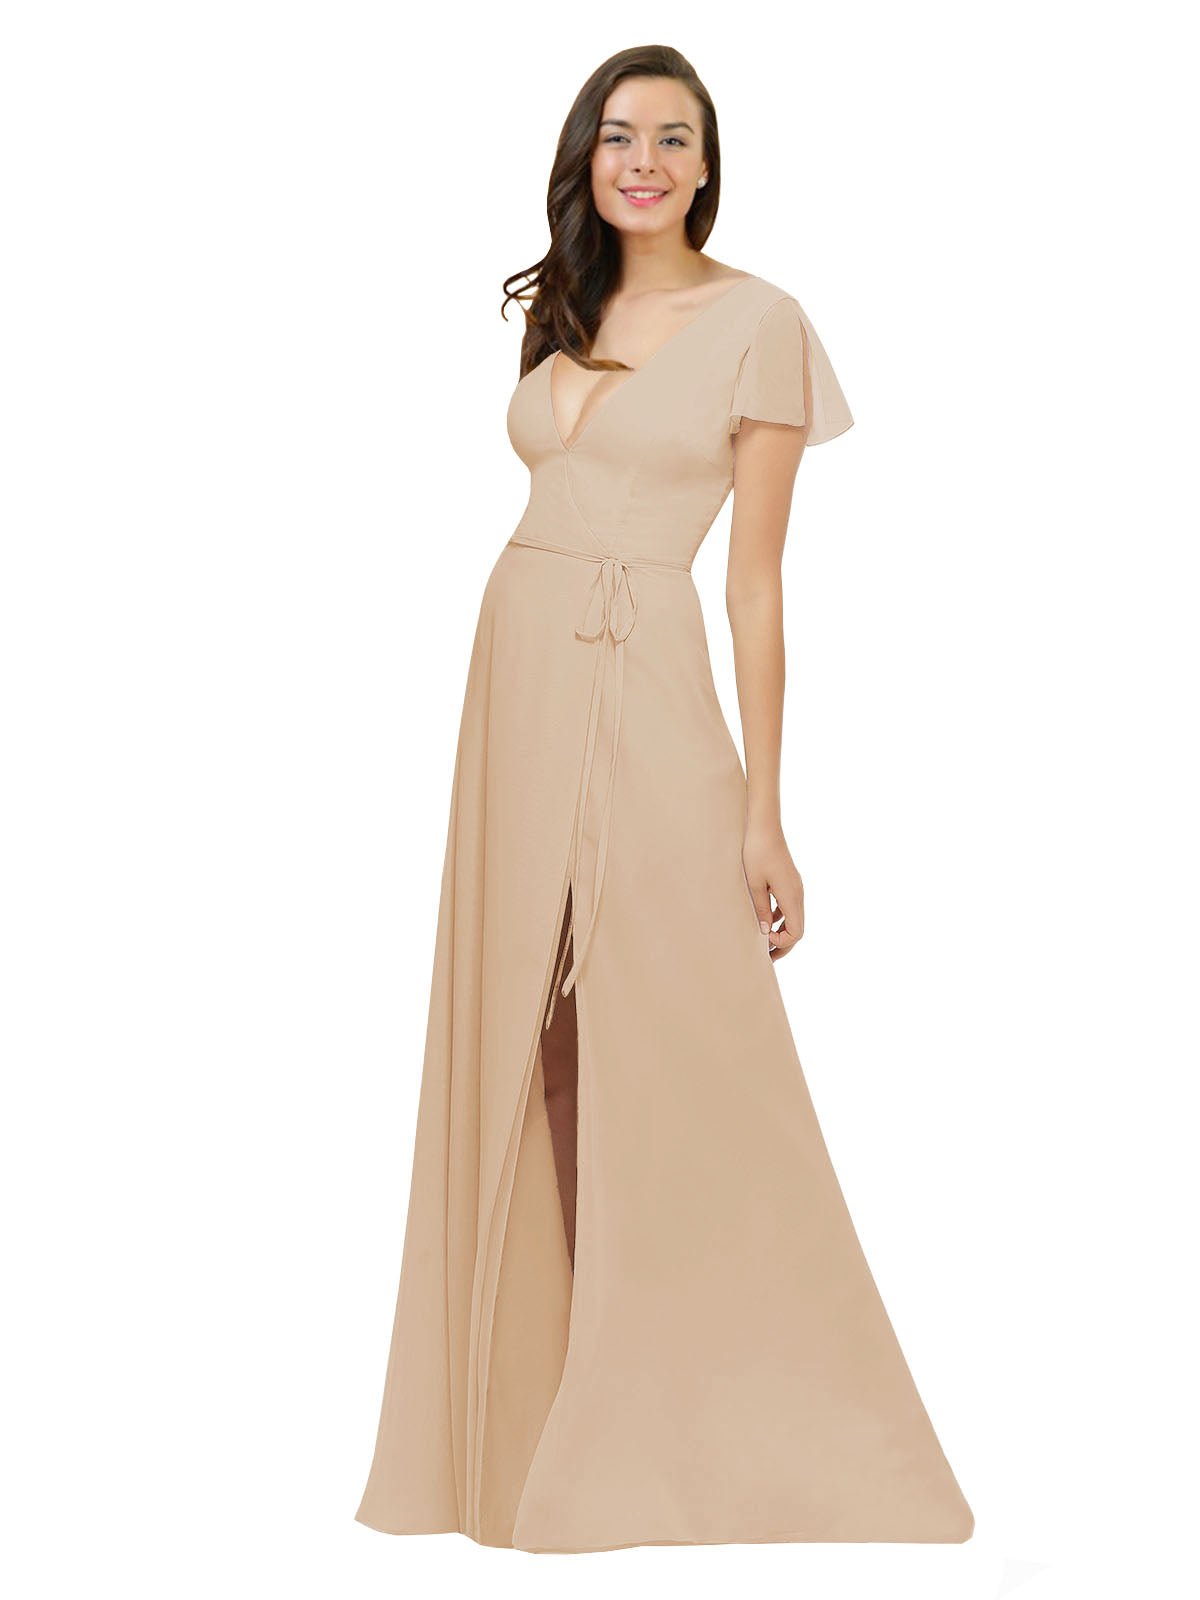 Champagne A-Line V-Neck Cap Sleeves Long Bridesmaid Dress Dayna